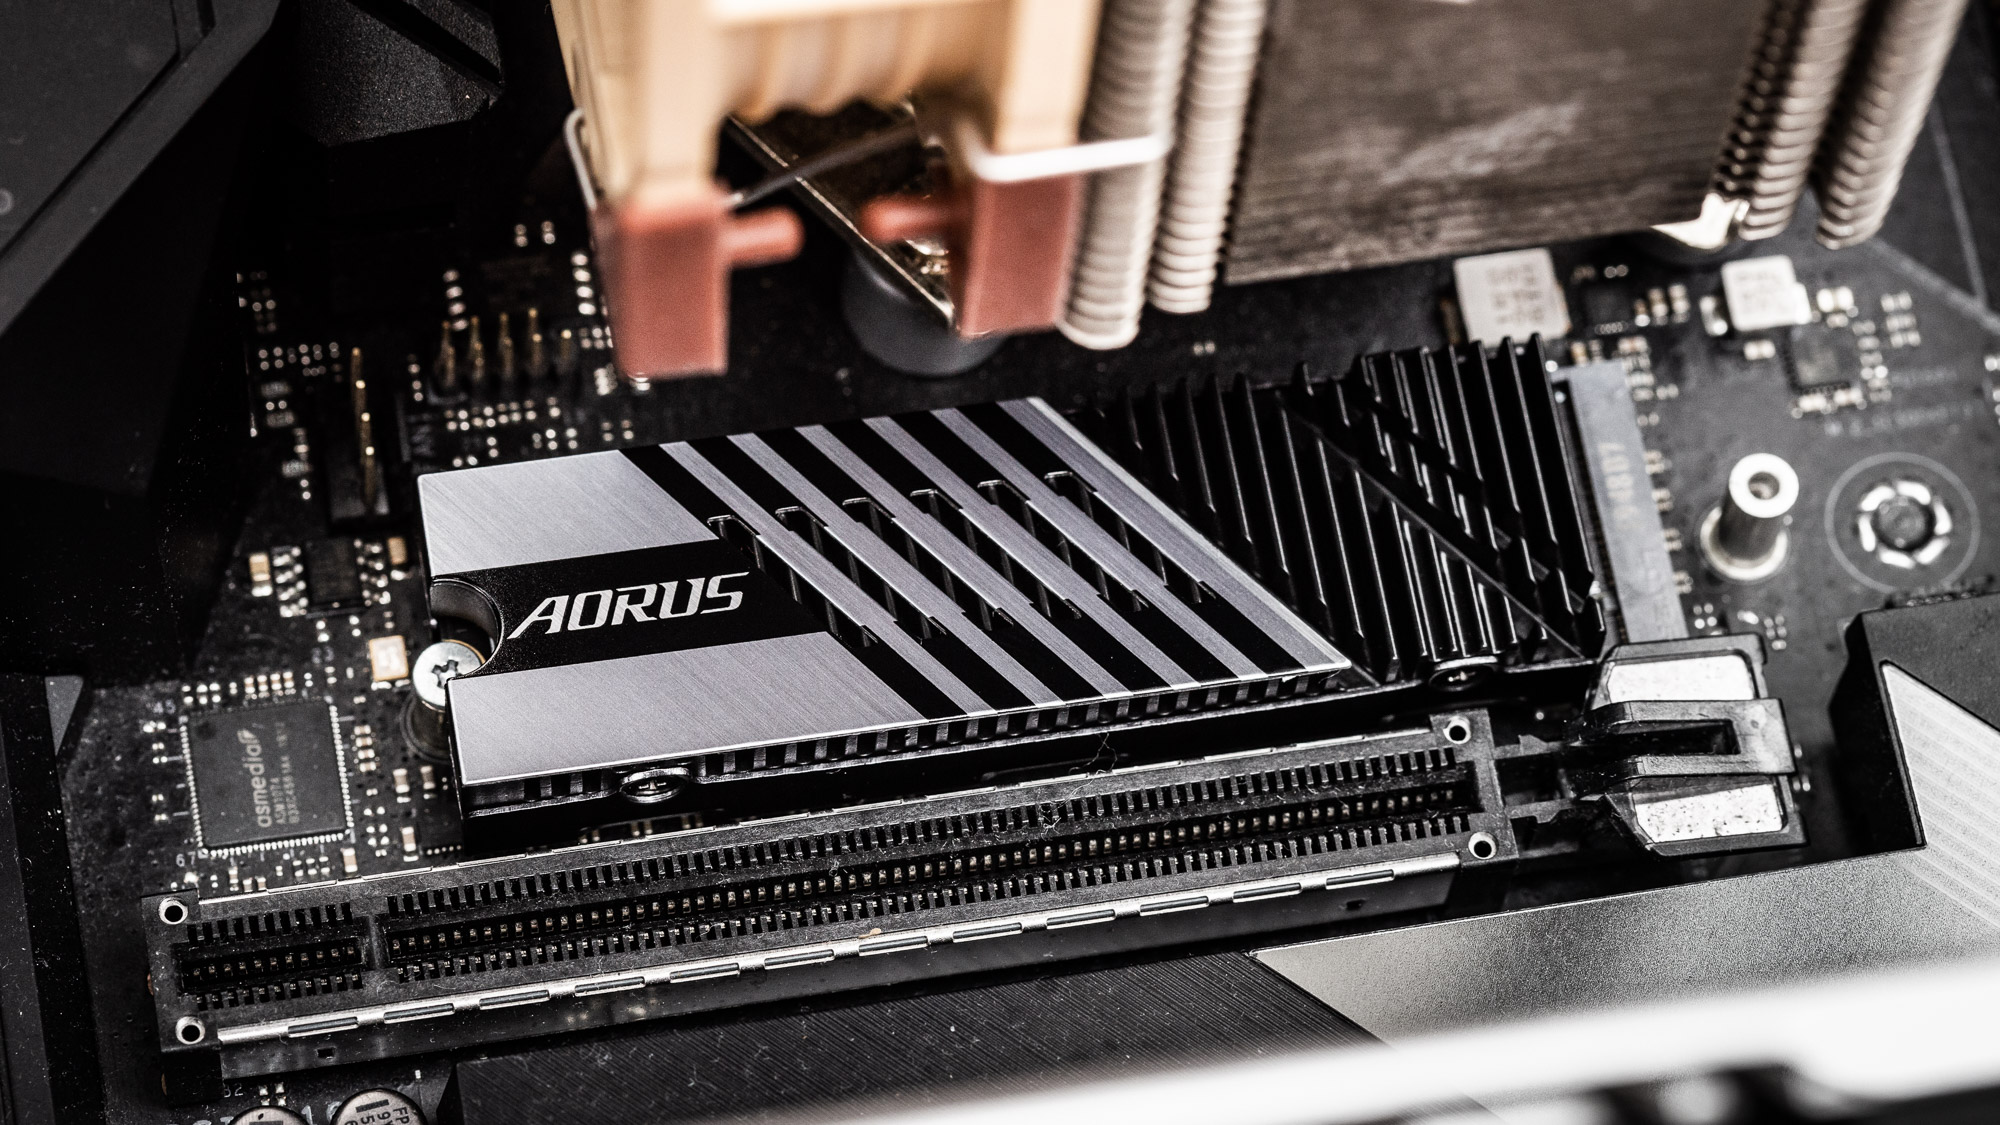 gigabyte-aorus-gen4-7000s-m.2-nvme-ssd-review:-nanocarbon-cooled-for-speed